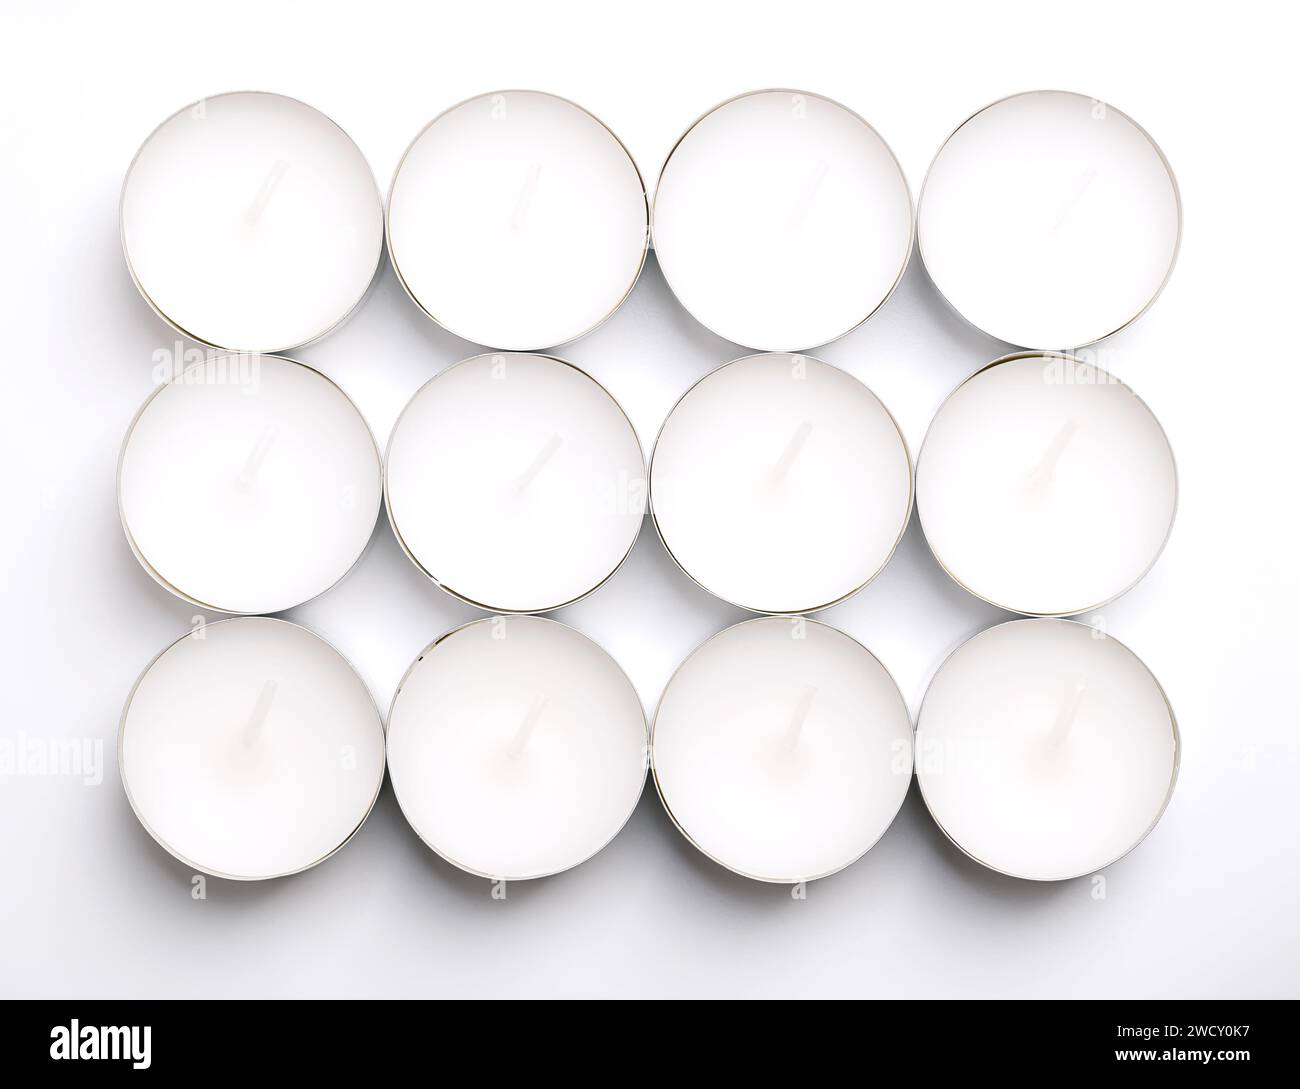 Group of tealights, candles in thin metal cups, so that the wax can liquefy completely while lit. Stock Photo